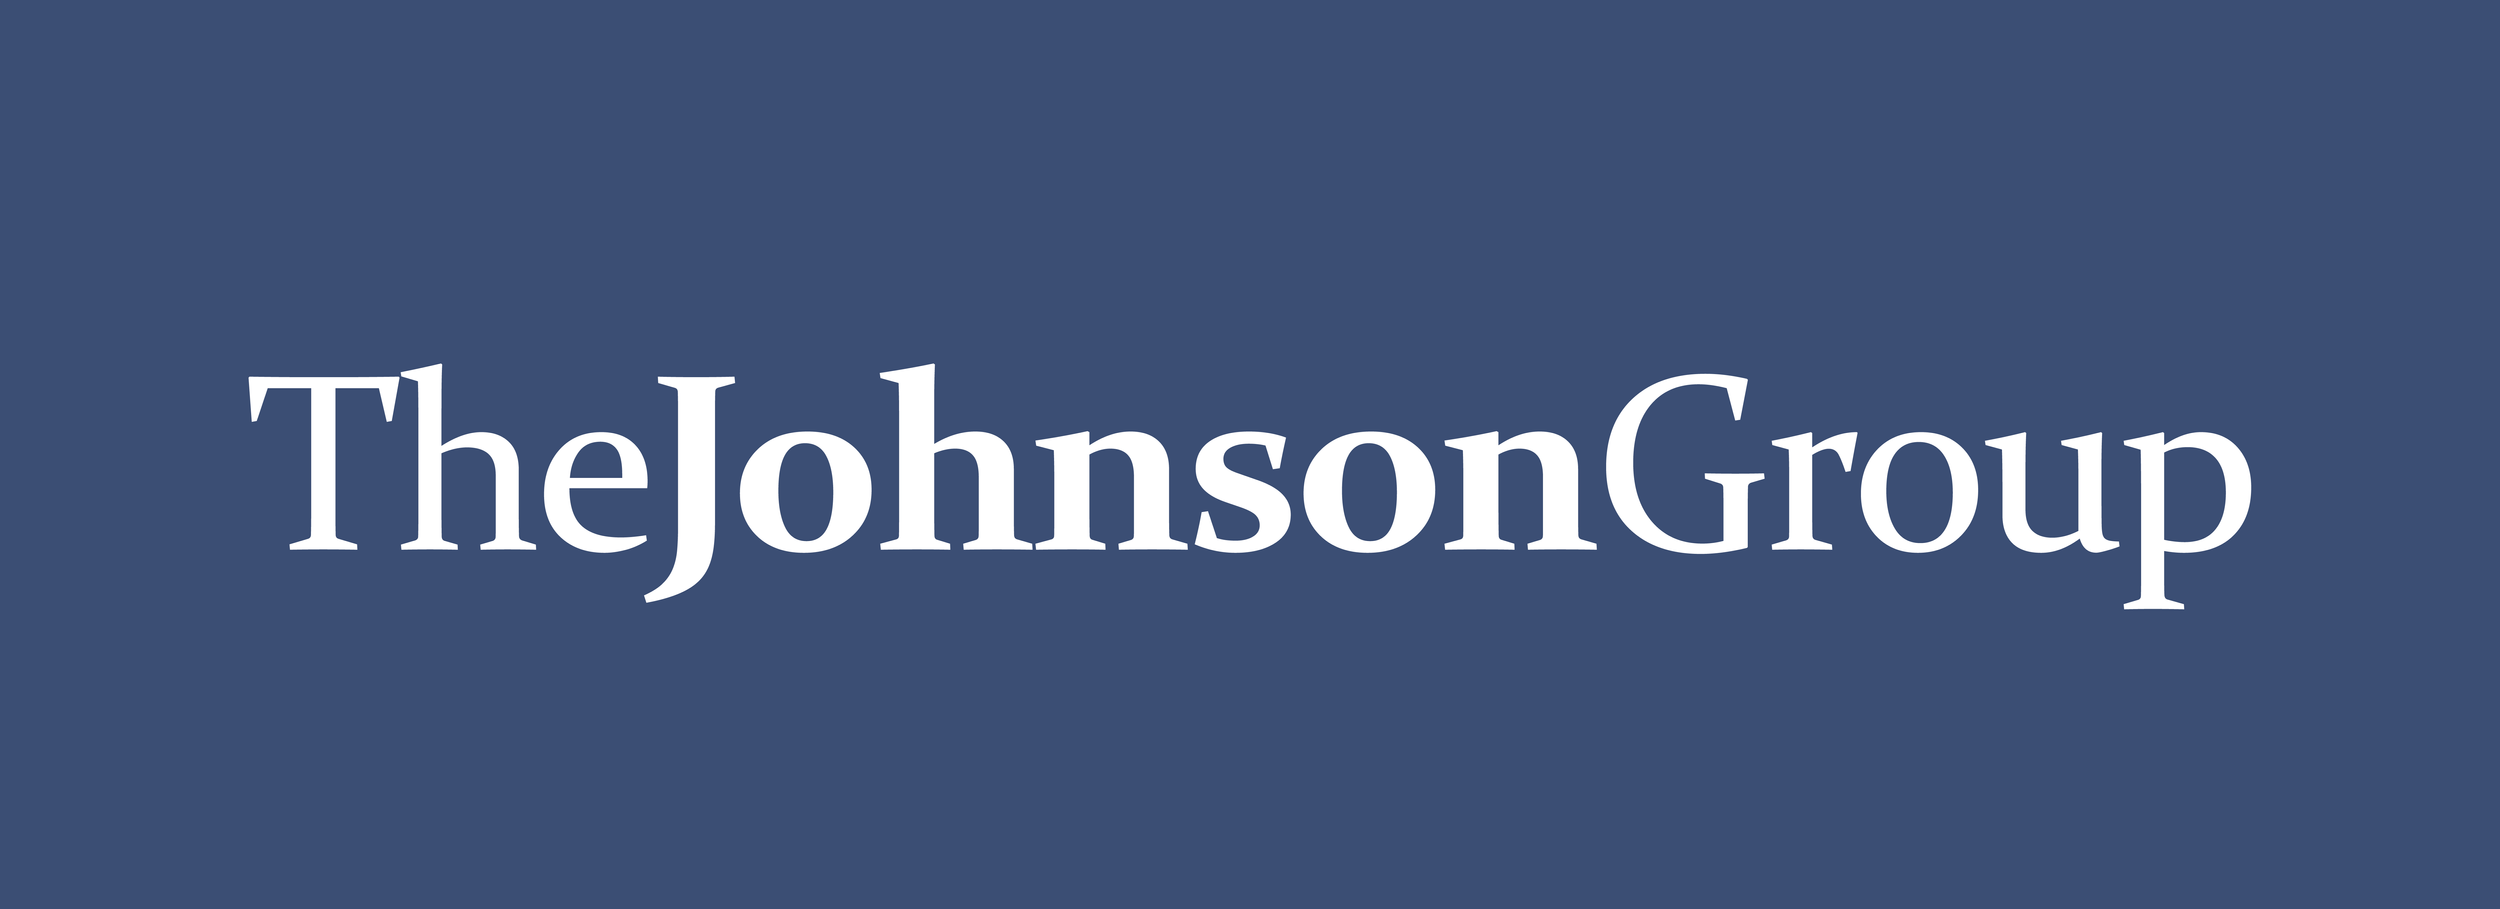 The Johnson Group.png